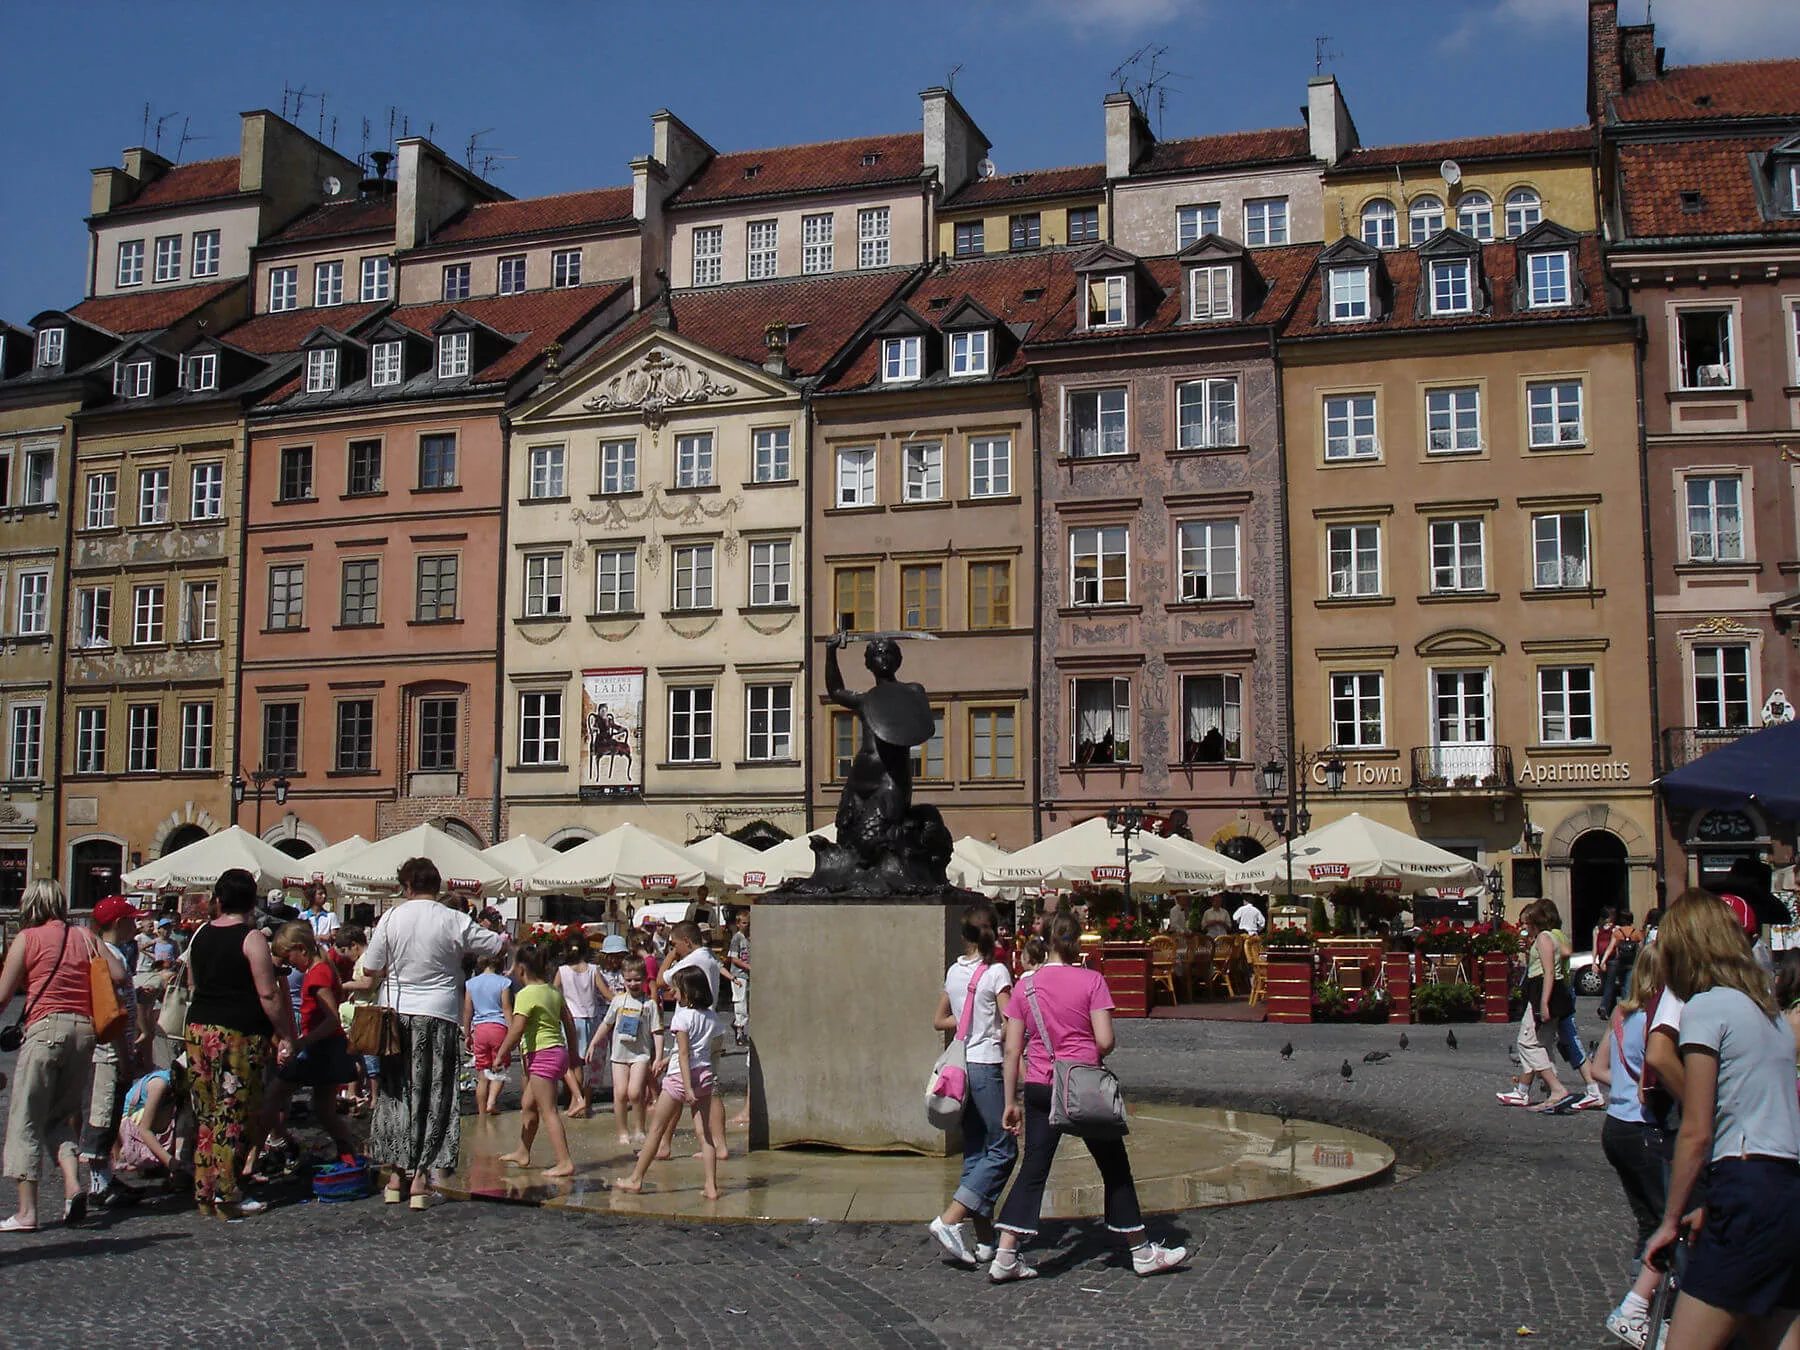 Visitors to Warsaw are astonished to learn that the “medieval” buildings ringing the Old Town Square are 20th-century reconstructions